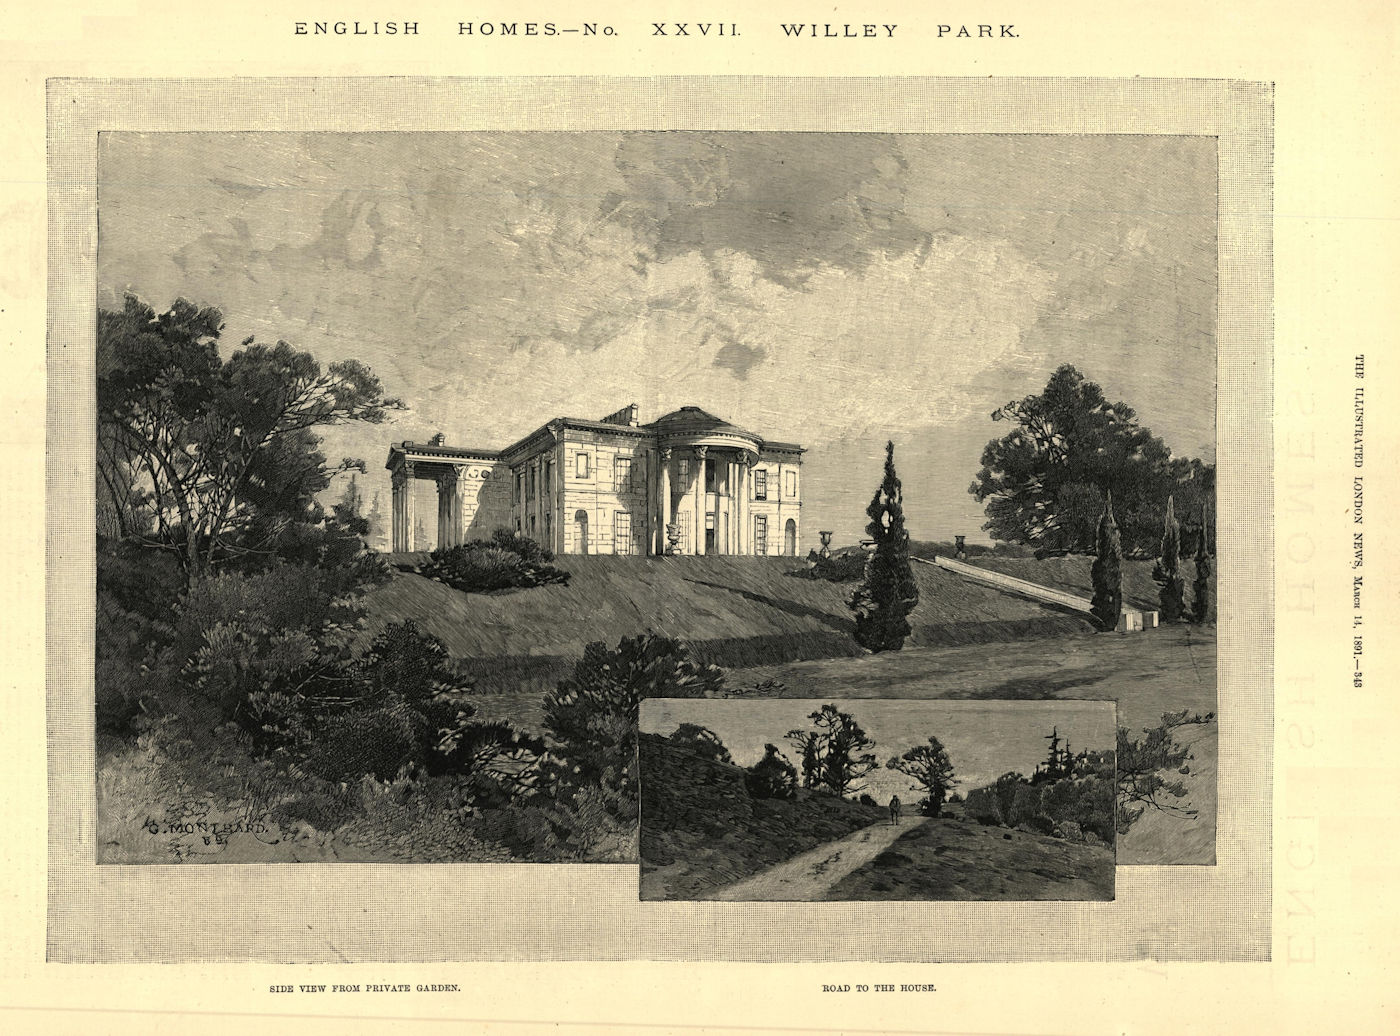 Associate Product Willey Park: Side view from private garden. Shropshire 1891 old antique print